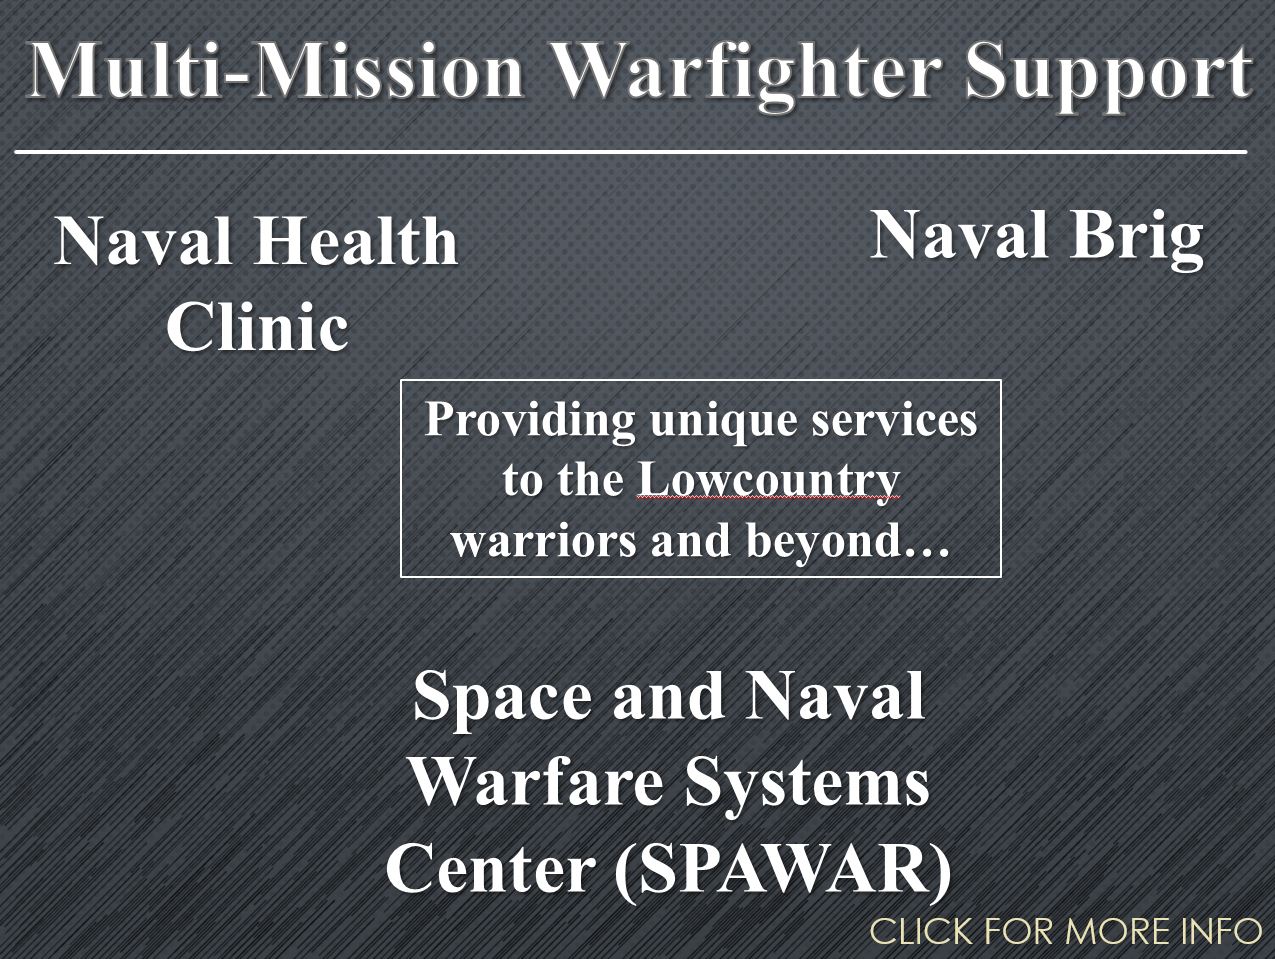 An infographic for Multi-Mission Warfighter Support